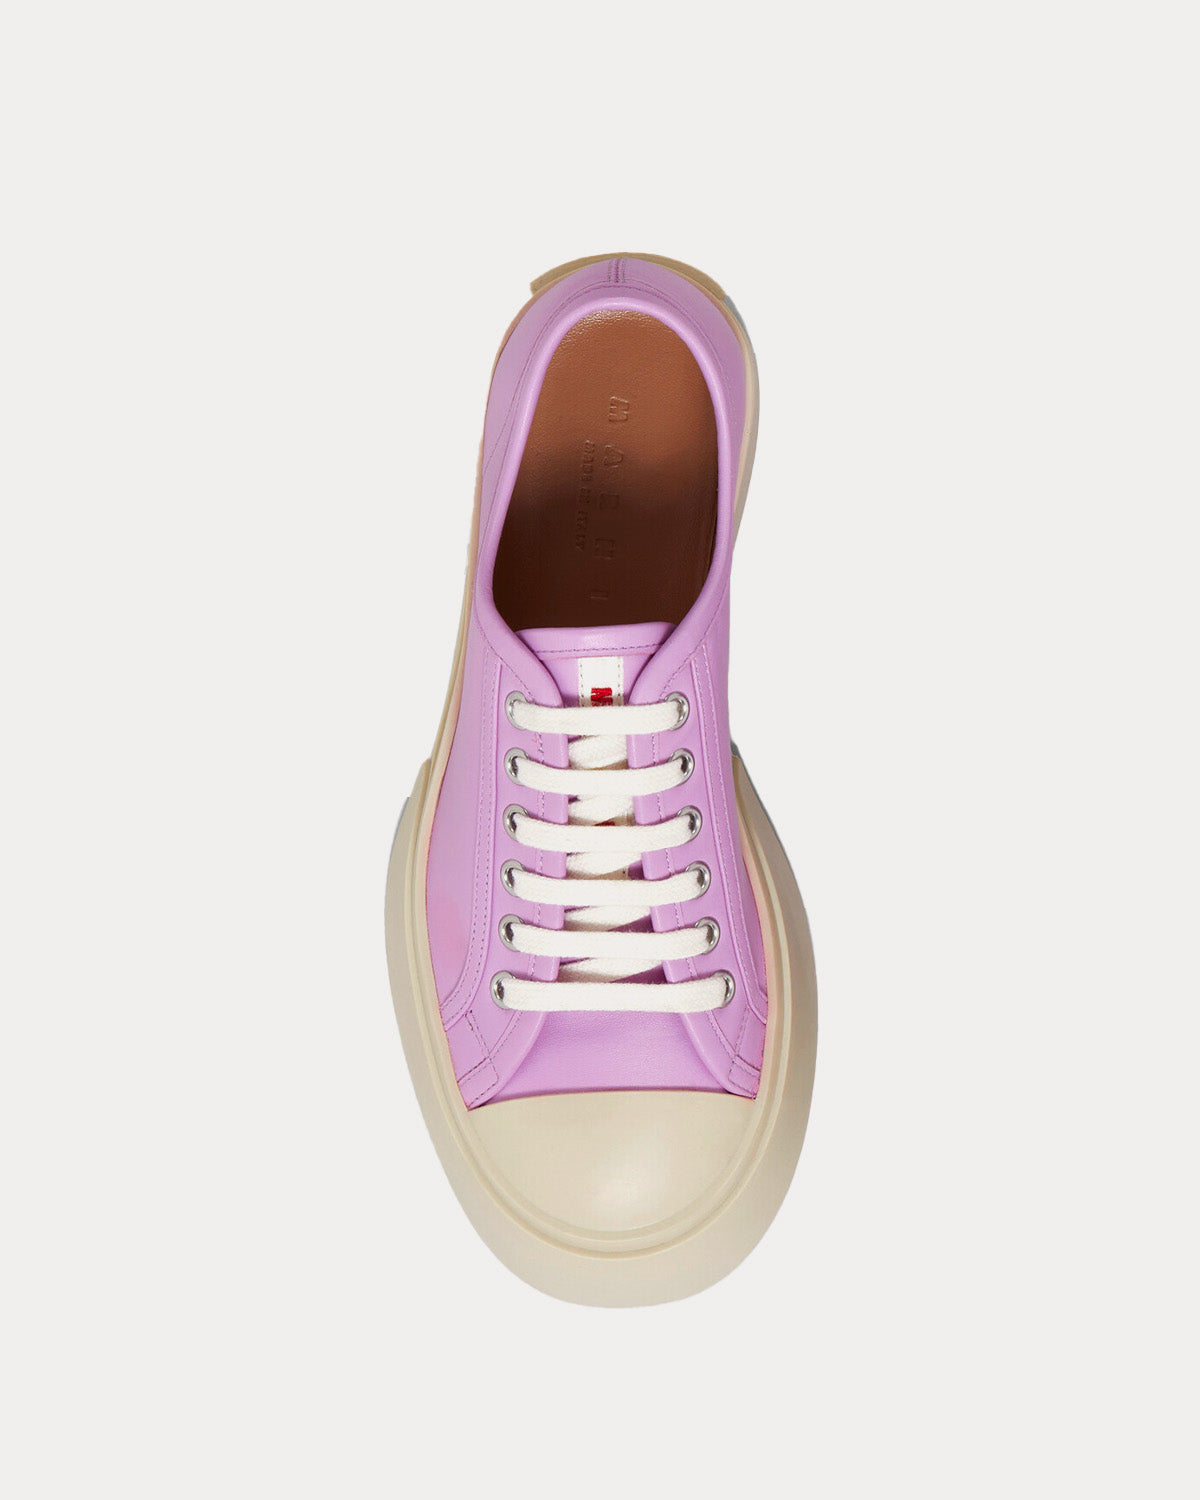 Marni - Pablo Leather Lilac Low Top Sneakers